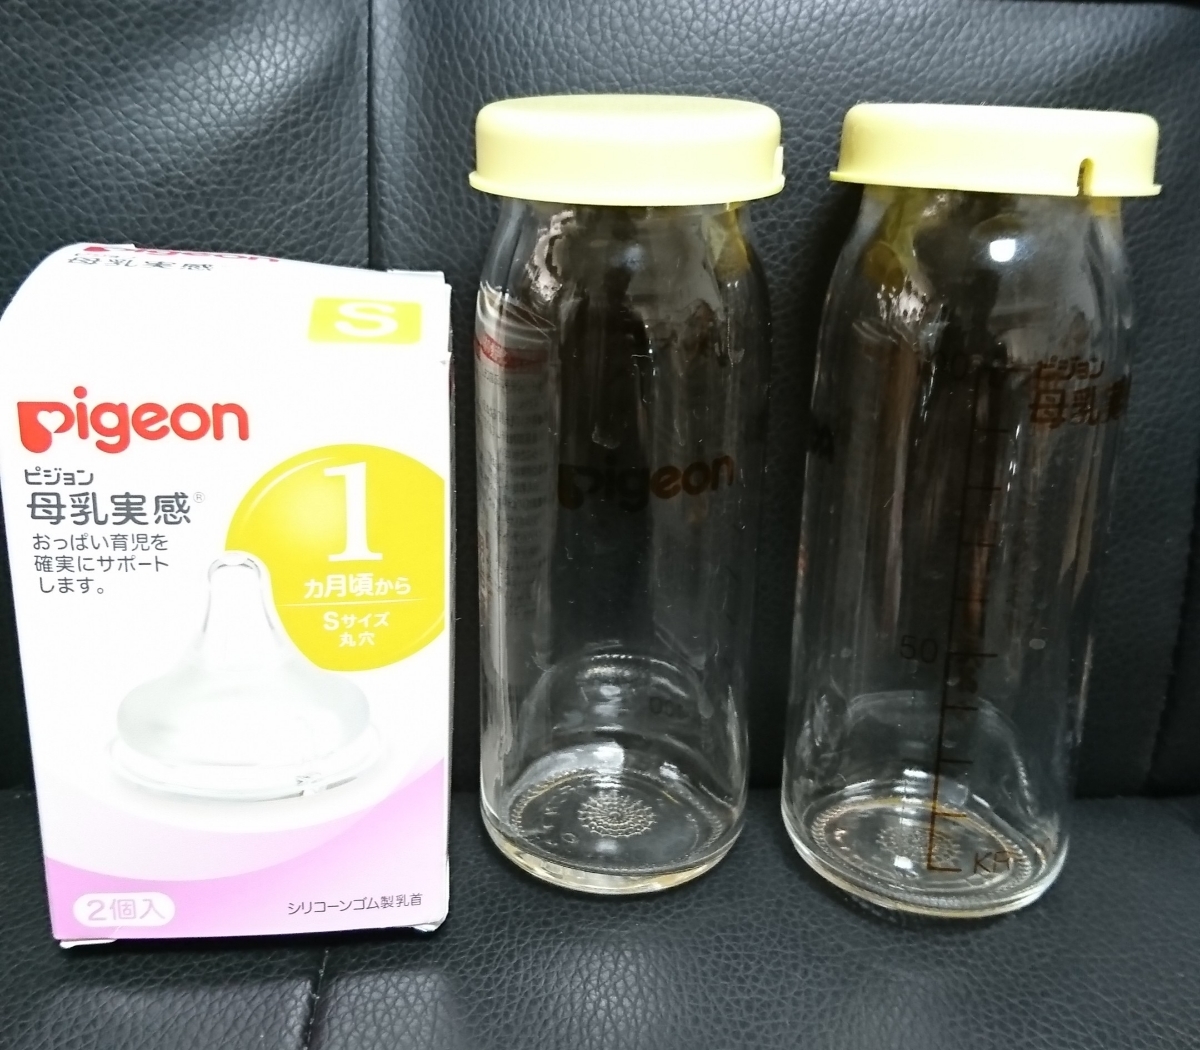 Pigeon feeding bottle two pcs set mother’s milk real feeling S size 1 months two piece entering silicon rubber newborn baby . child goods for baby Pigeon 